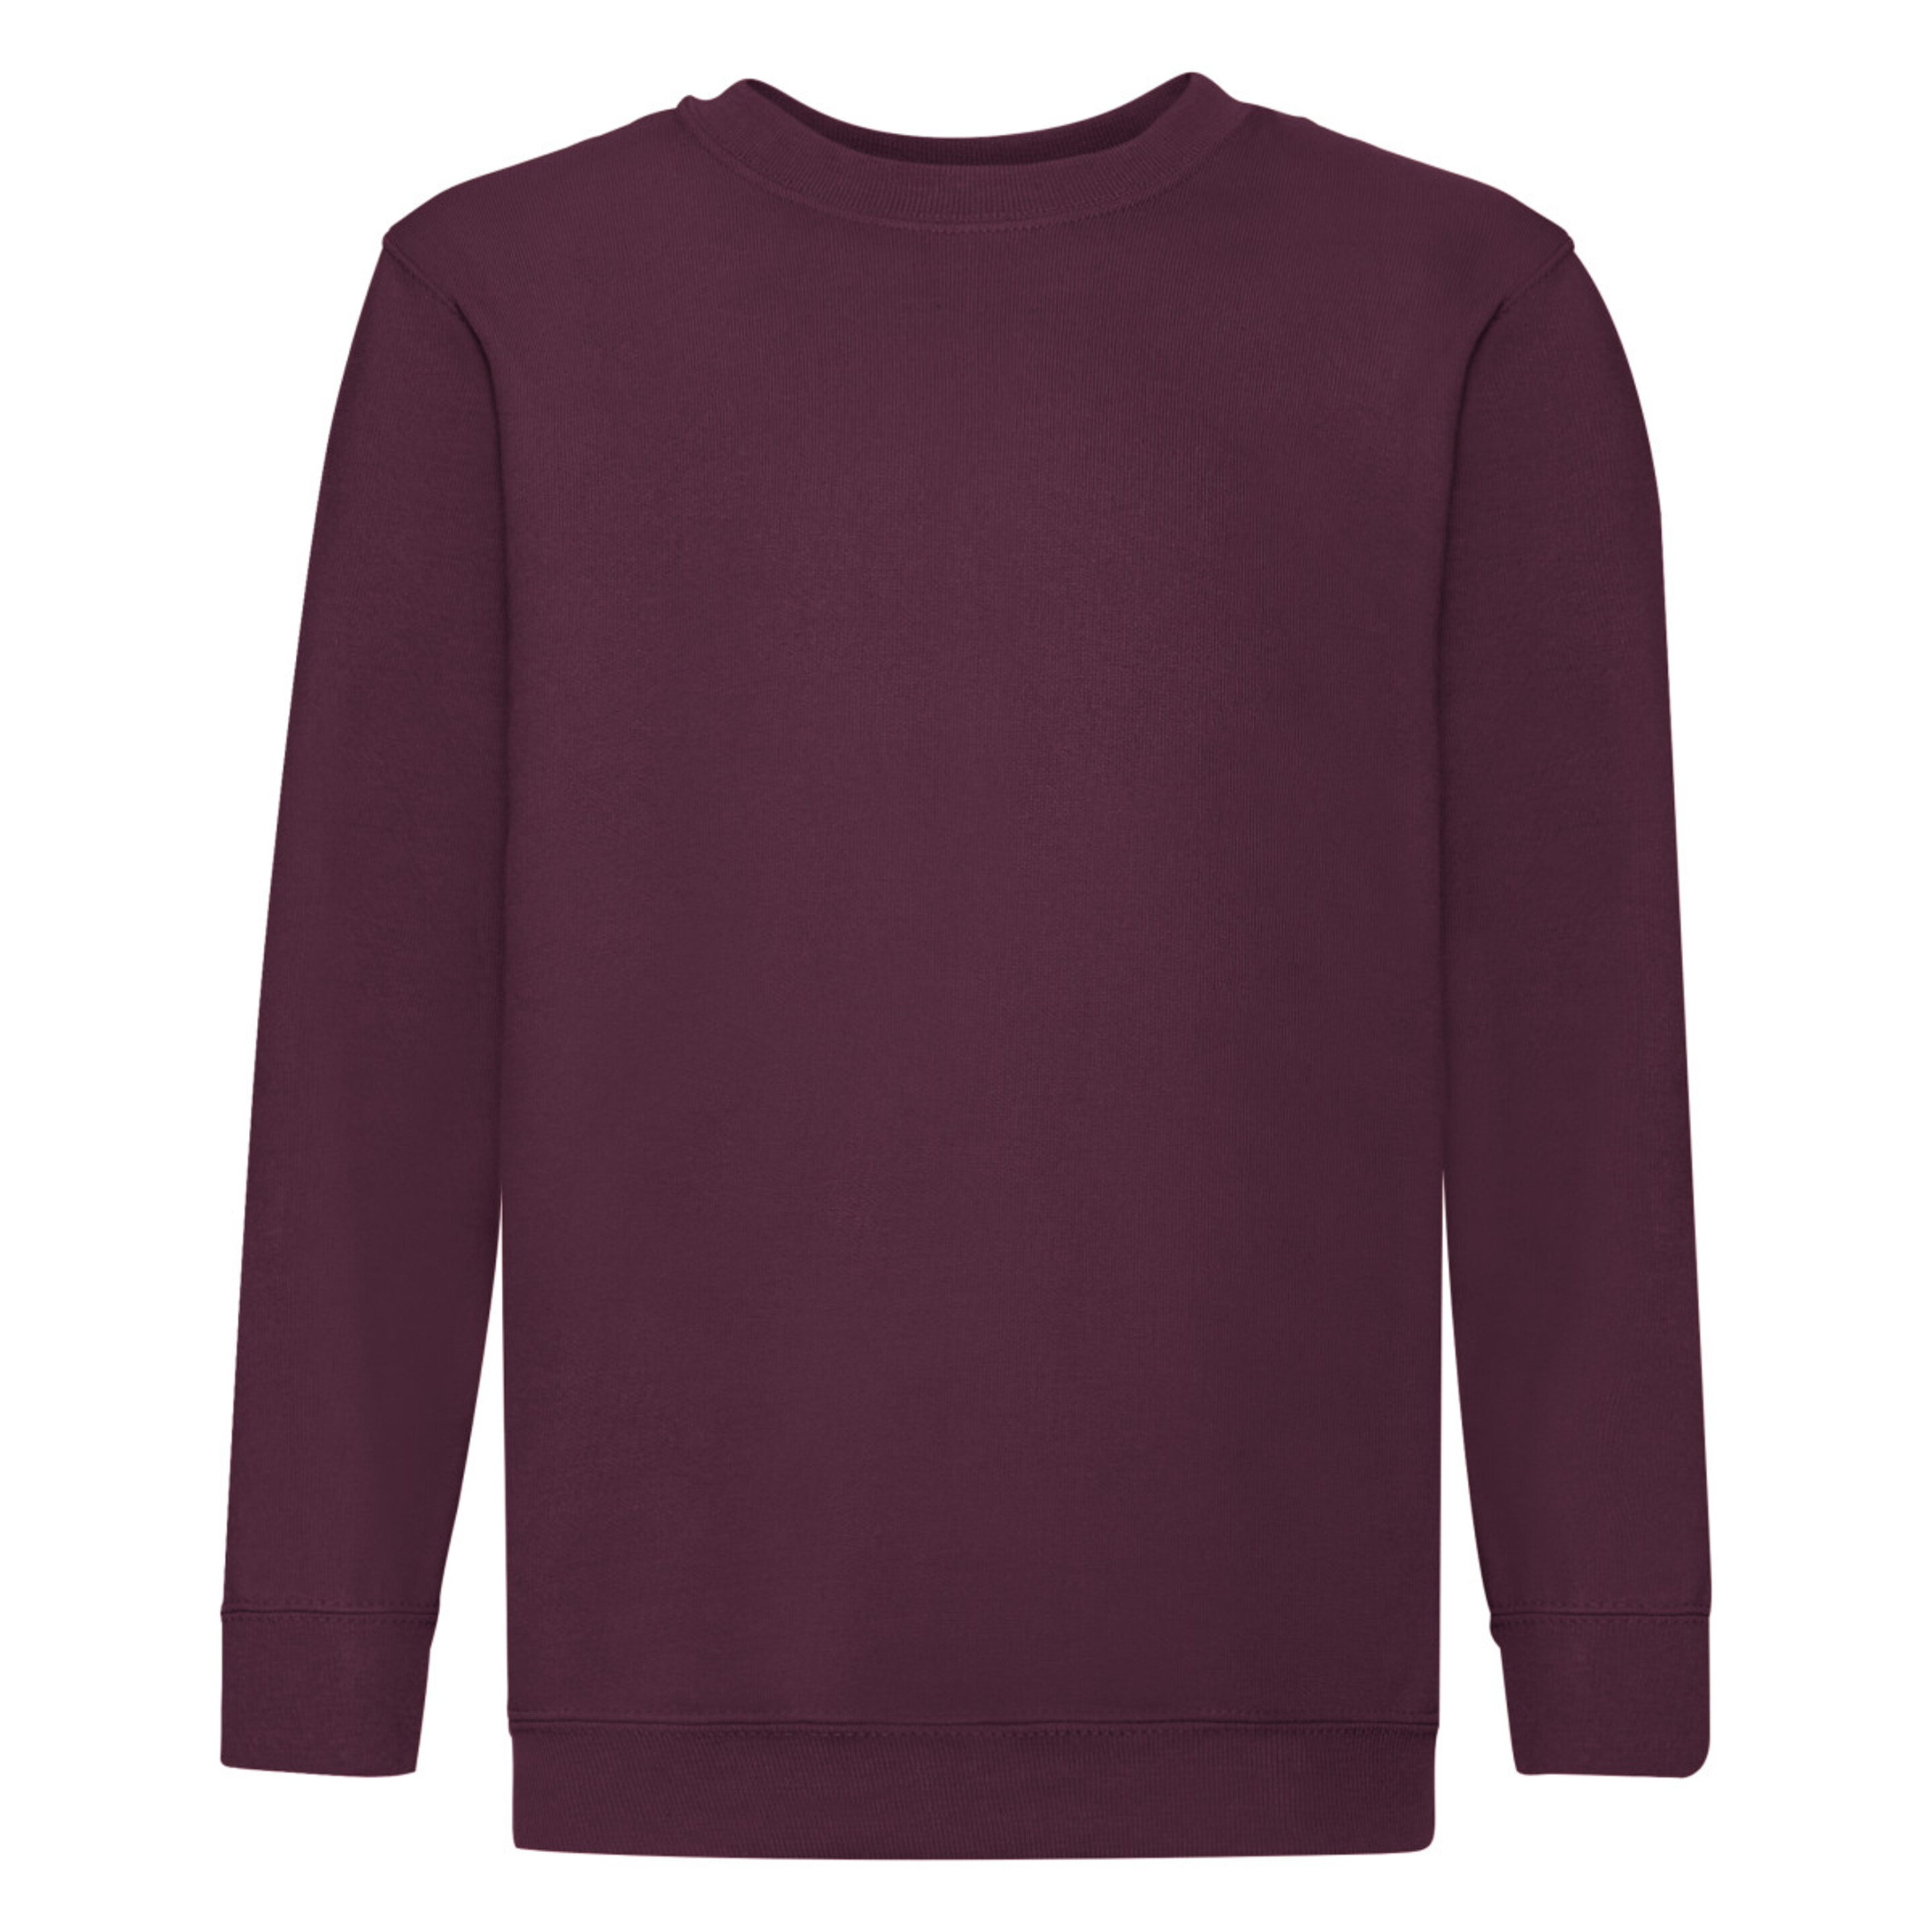 Sudadera Fruit Of The Loom Con Mangas Set-in (pack 2) - burgundy - 